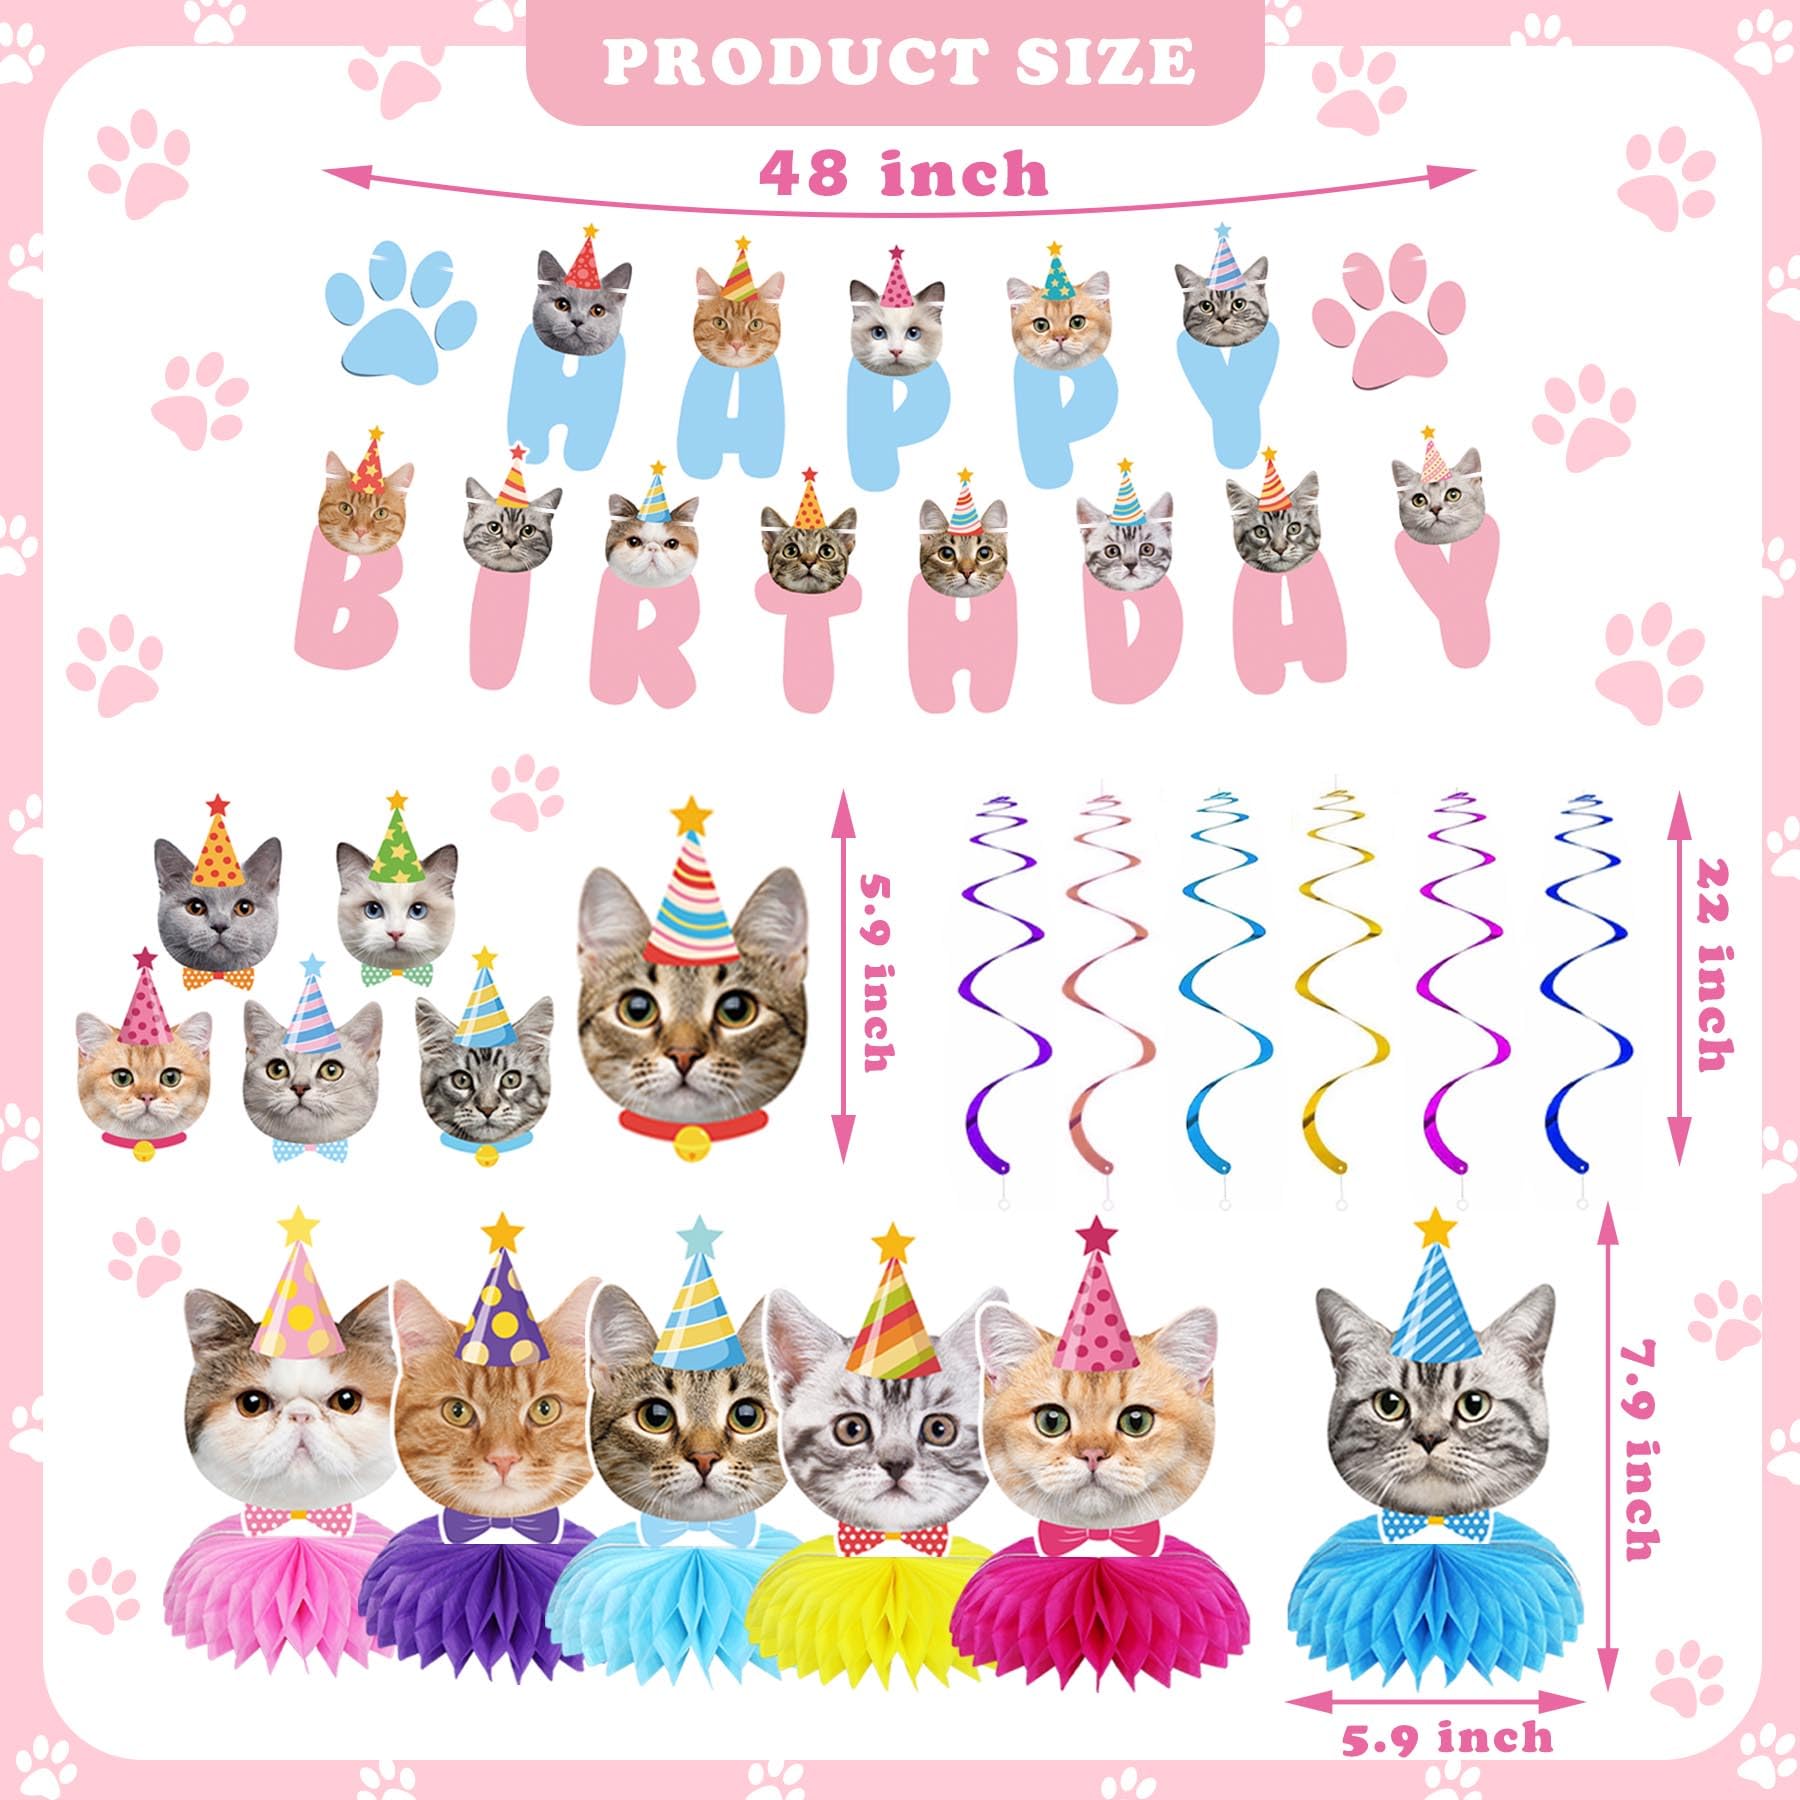 GOYOSWA Cat Birthday Party Supplies Cat Birthday Party Decorations, Cat Themed Birthday Party Supplies Includes 1 Birthday Banner, 6 Cat Honeycomb Centerpieces, 6 Hanging Swirls with 6 Cat Cutouts